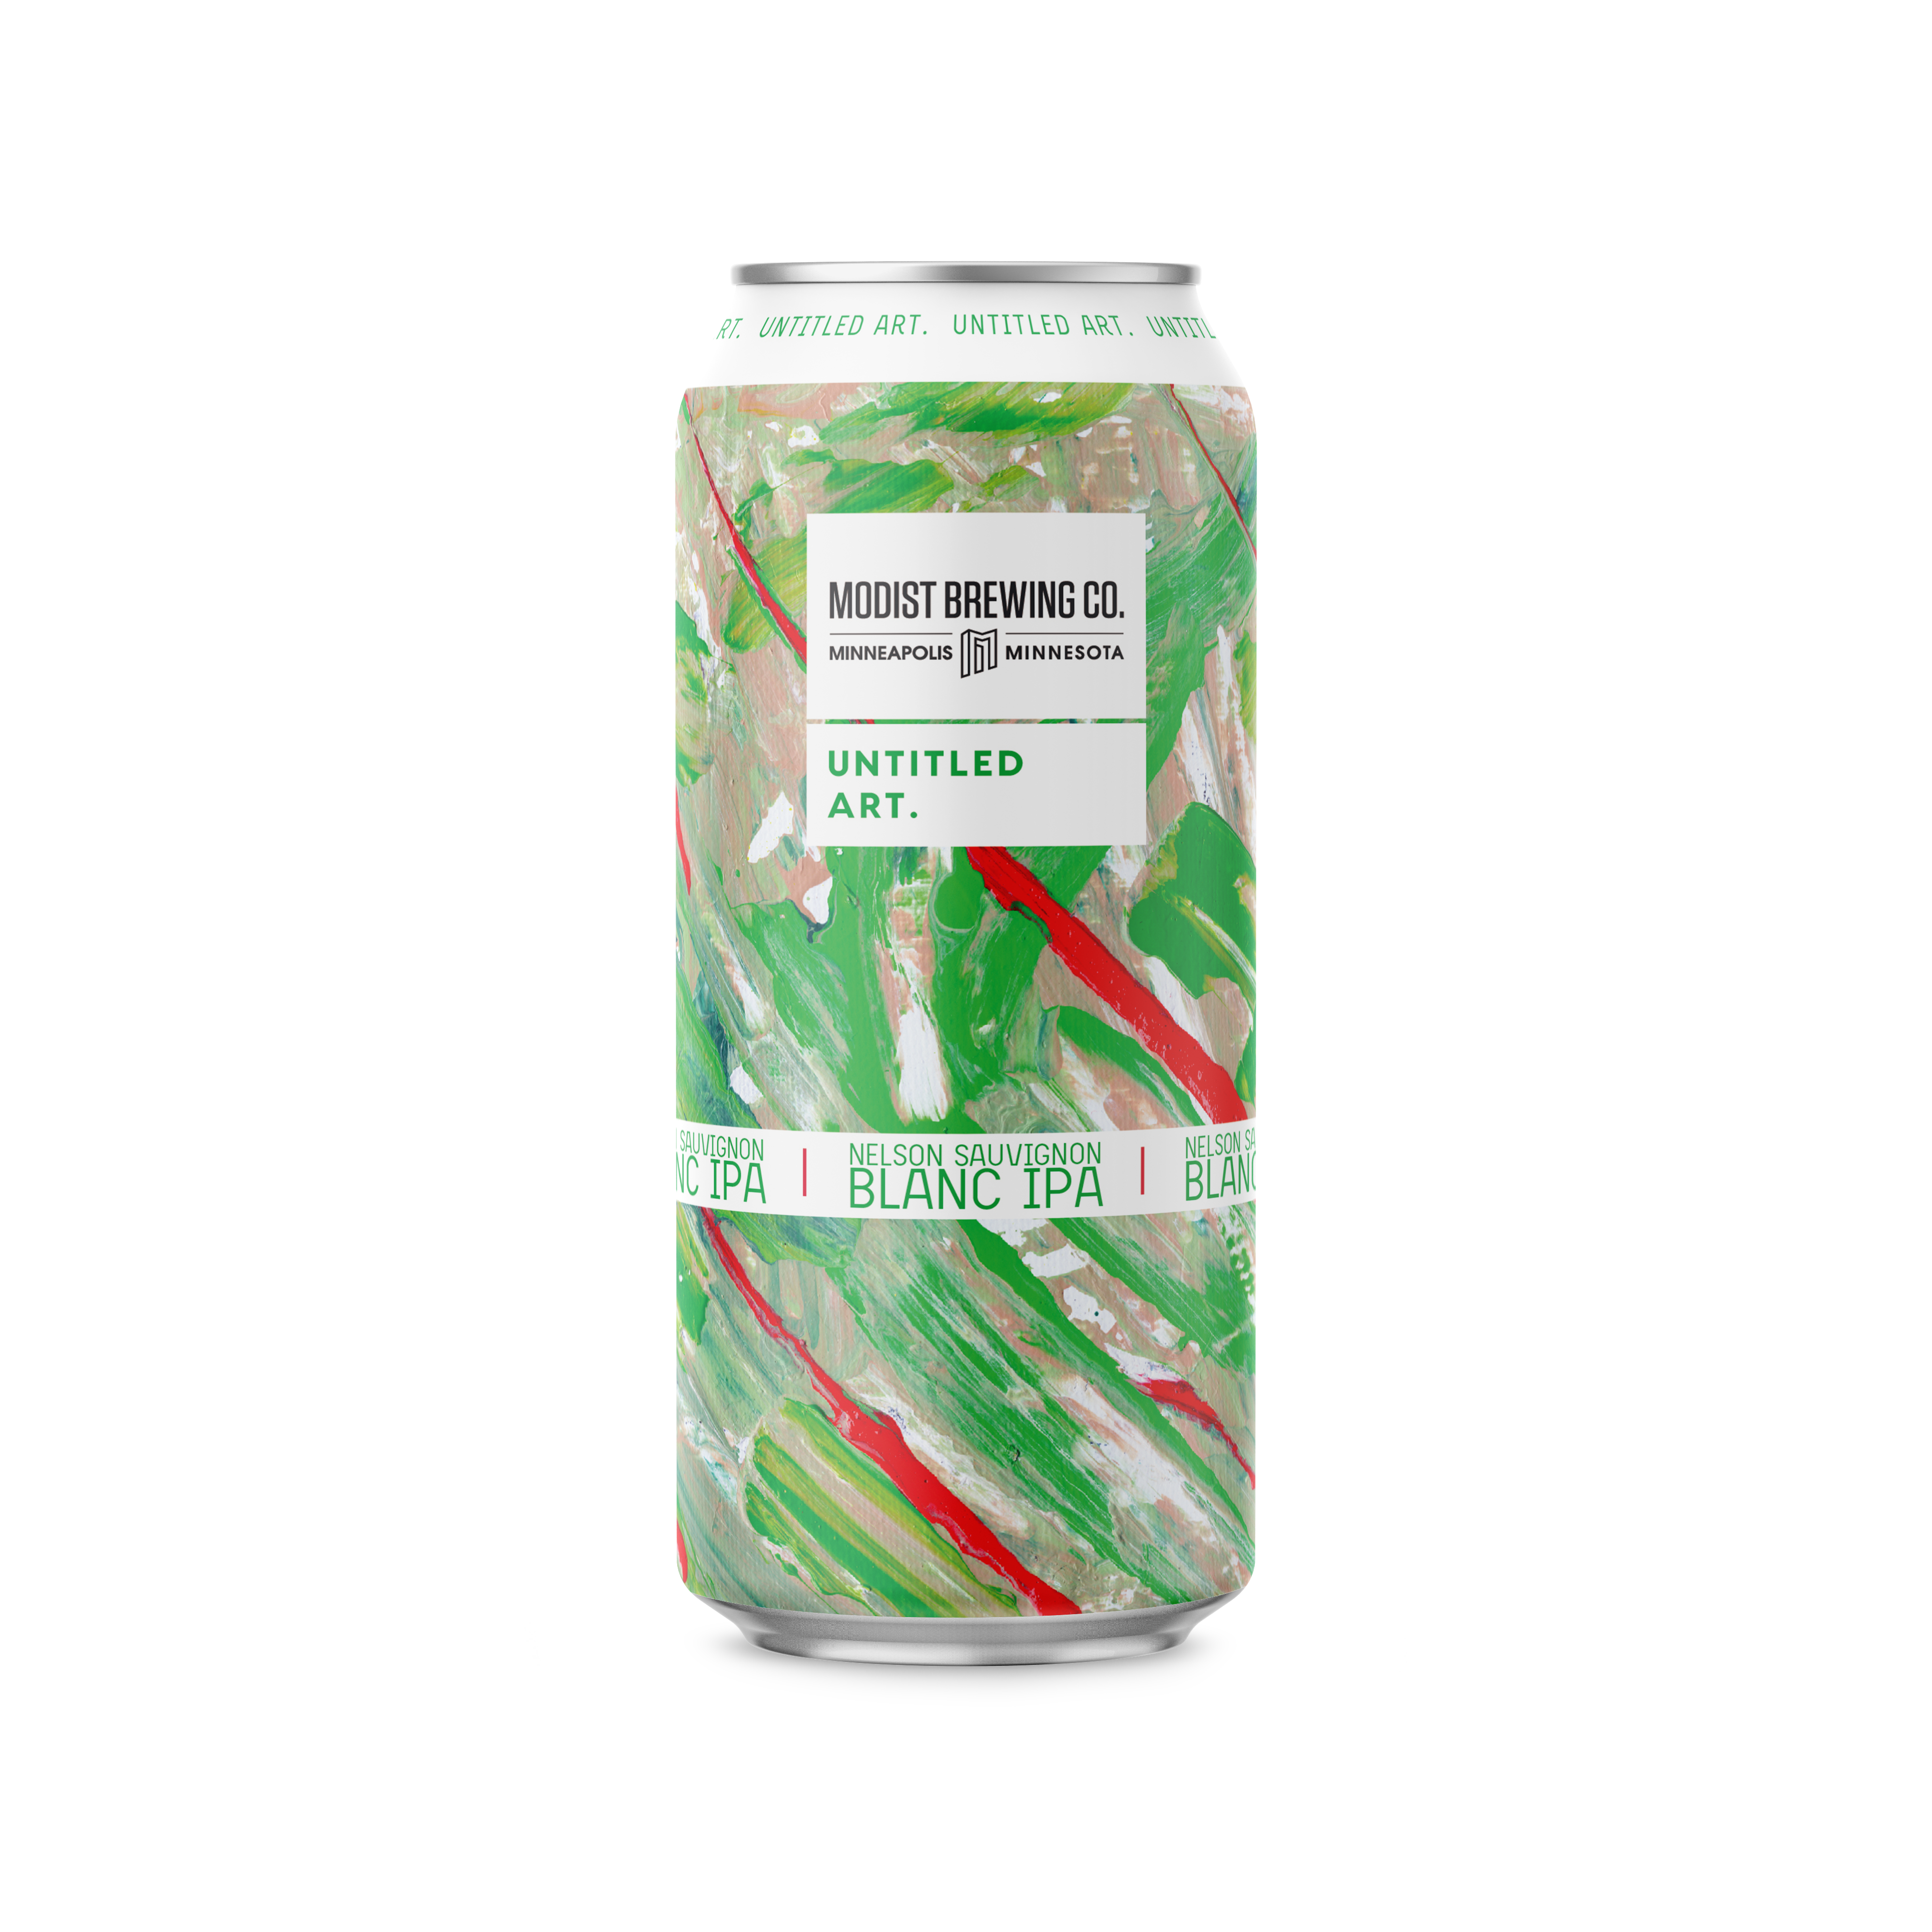 A can of green and white striped beer.